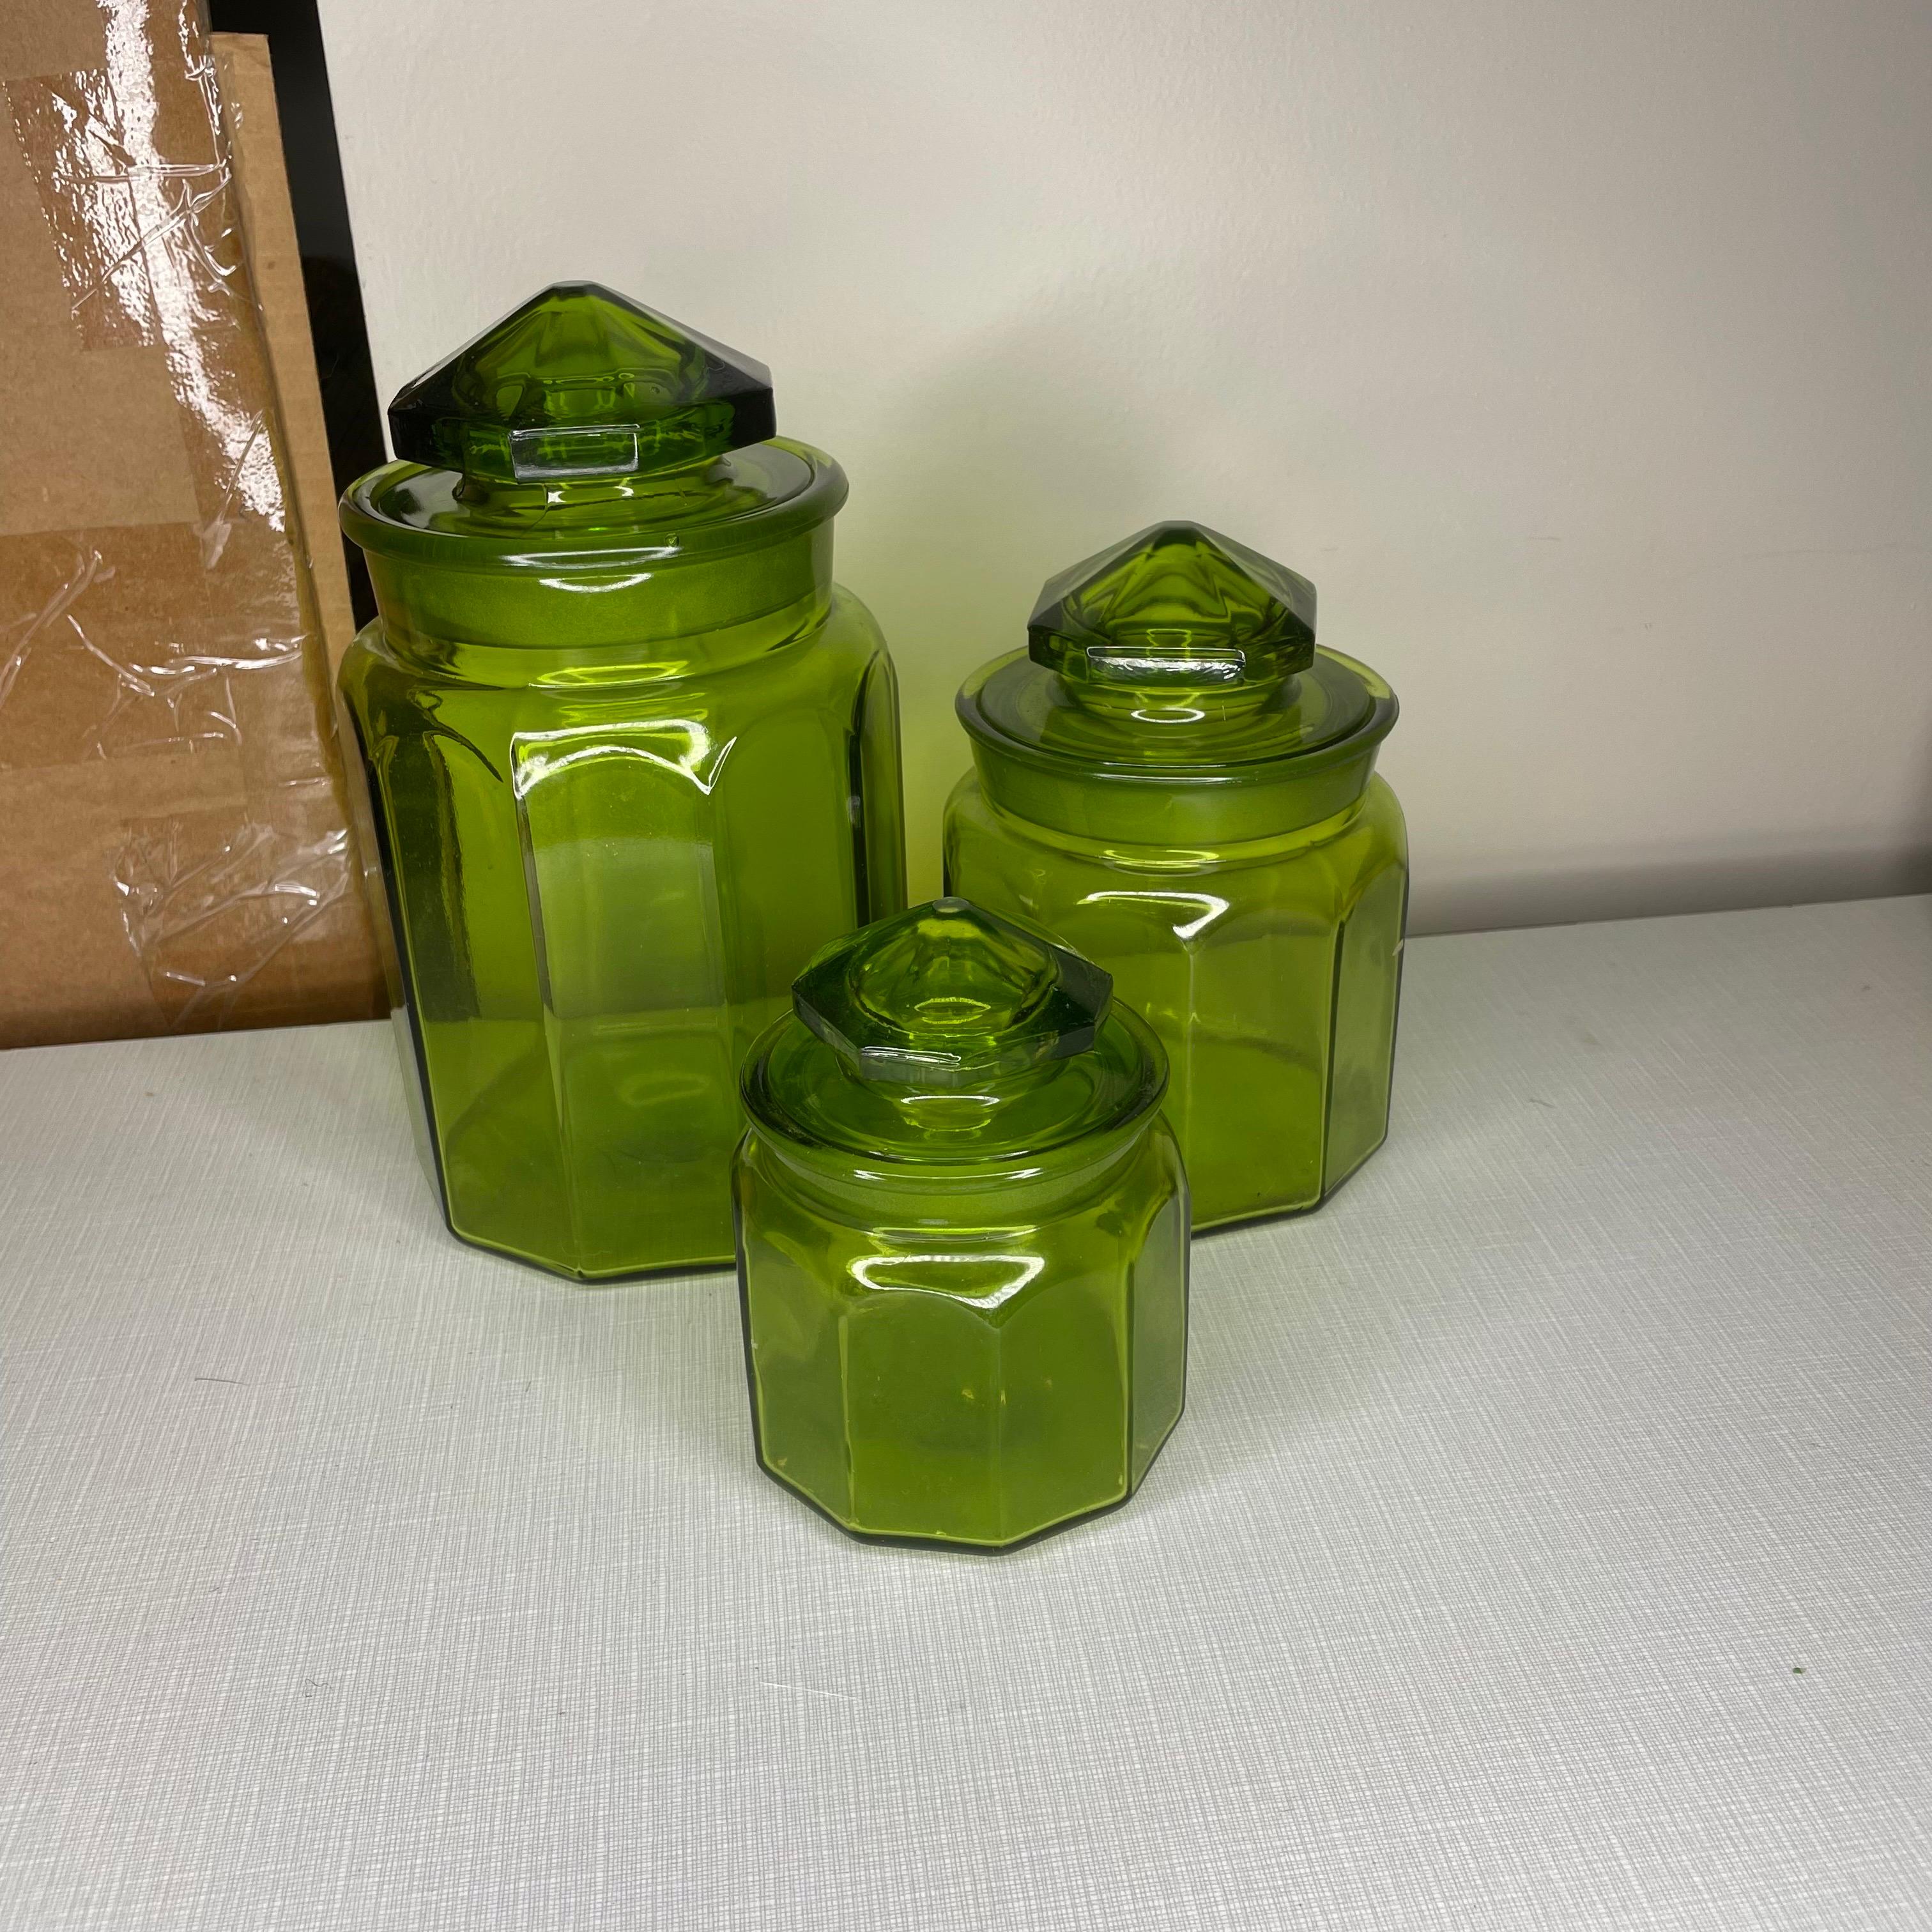 Set of three antique green glass canisters. Measurements are 9 1/2 inches for the tall one by 5 inches in diameter; the medium one is 6 1/2 inches tall by 4 1/2inches in diameter; The small one is 5 inches tall by 4 inches in diameter. All are in